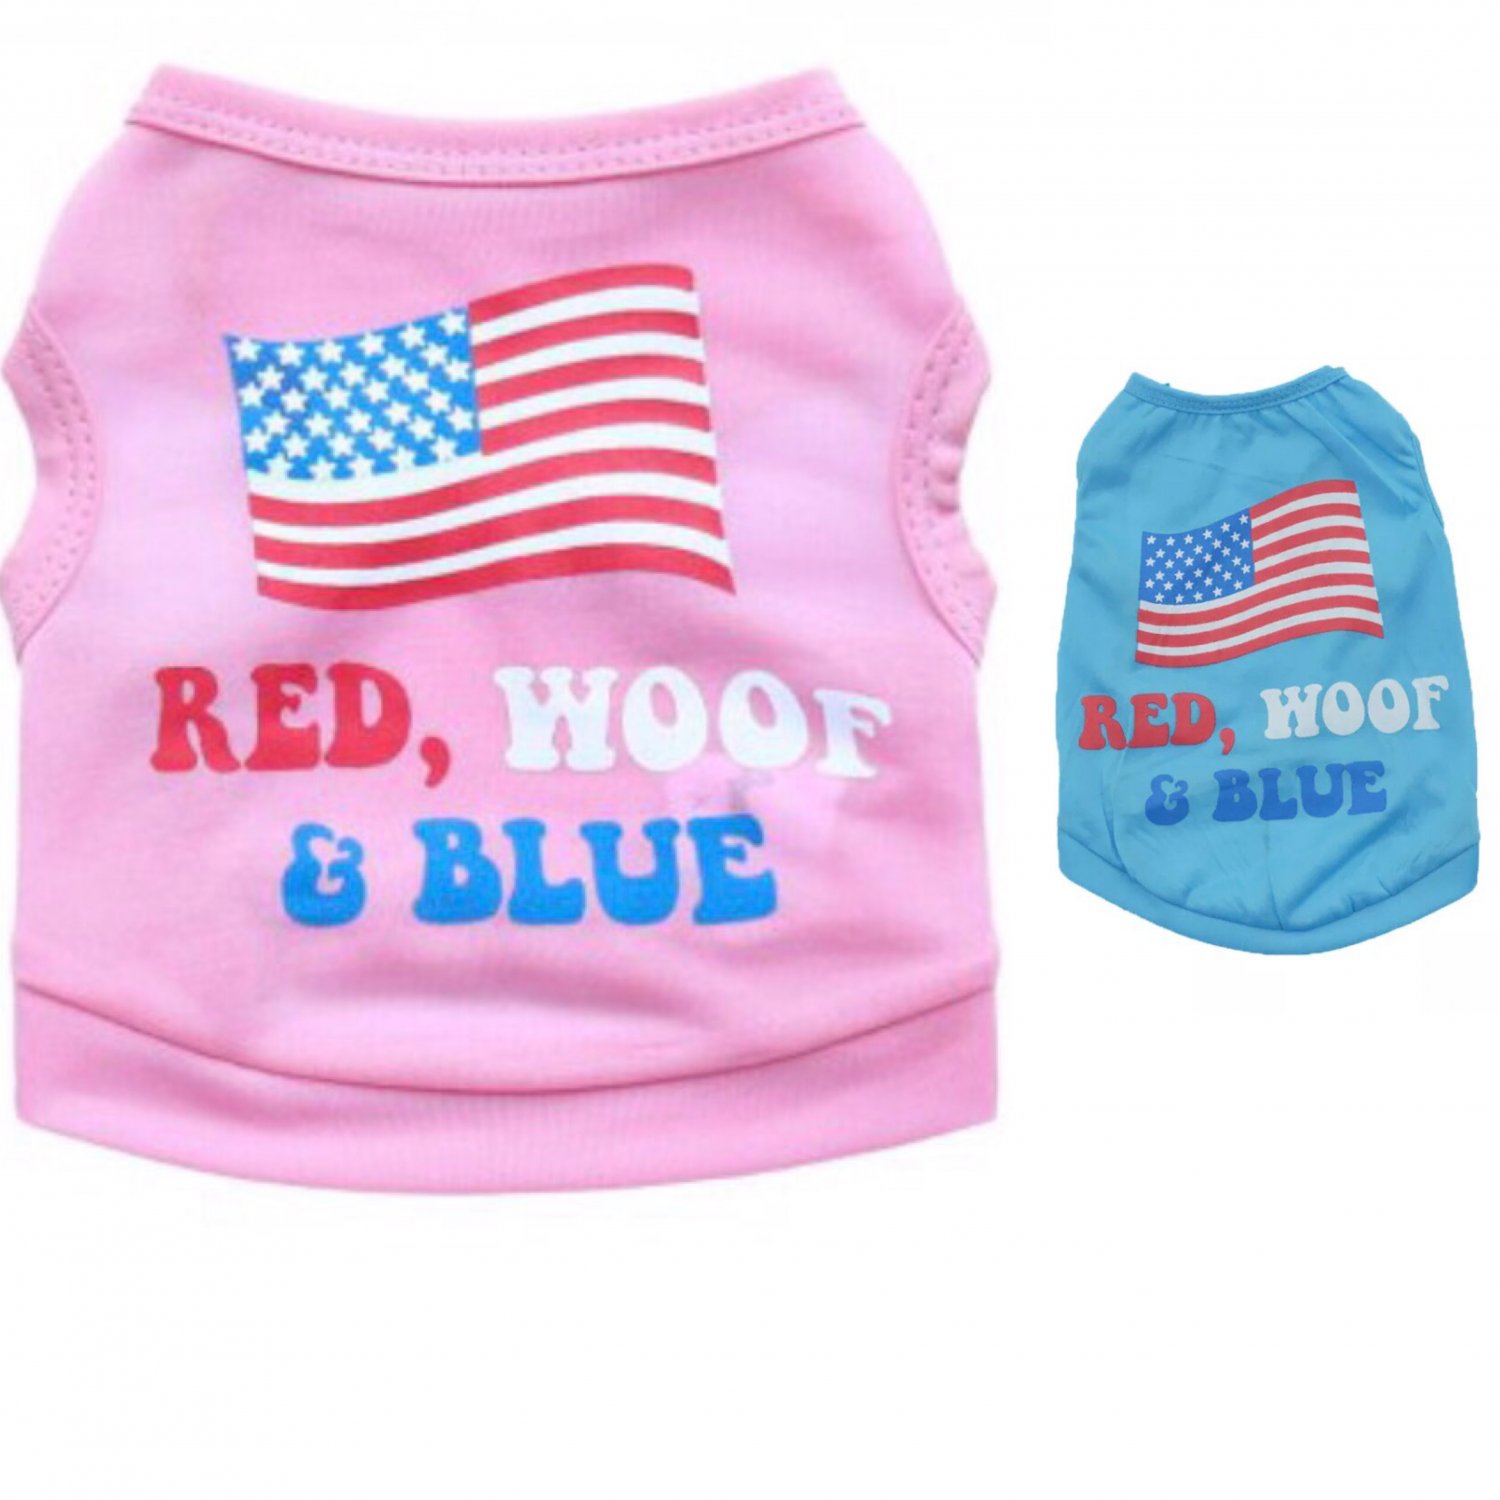 Red, Woof & Blue Pet Tank Top XS-L Puppy Dog Clothes Shirt American Flag 4th of July Apparel